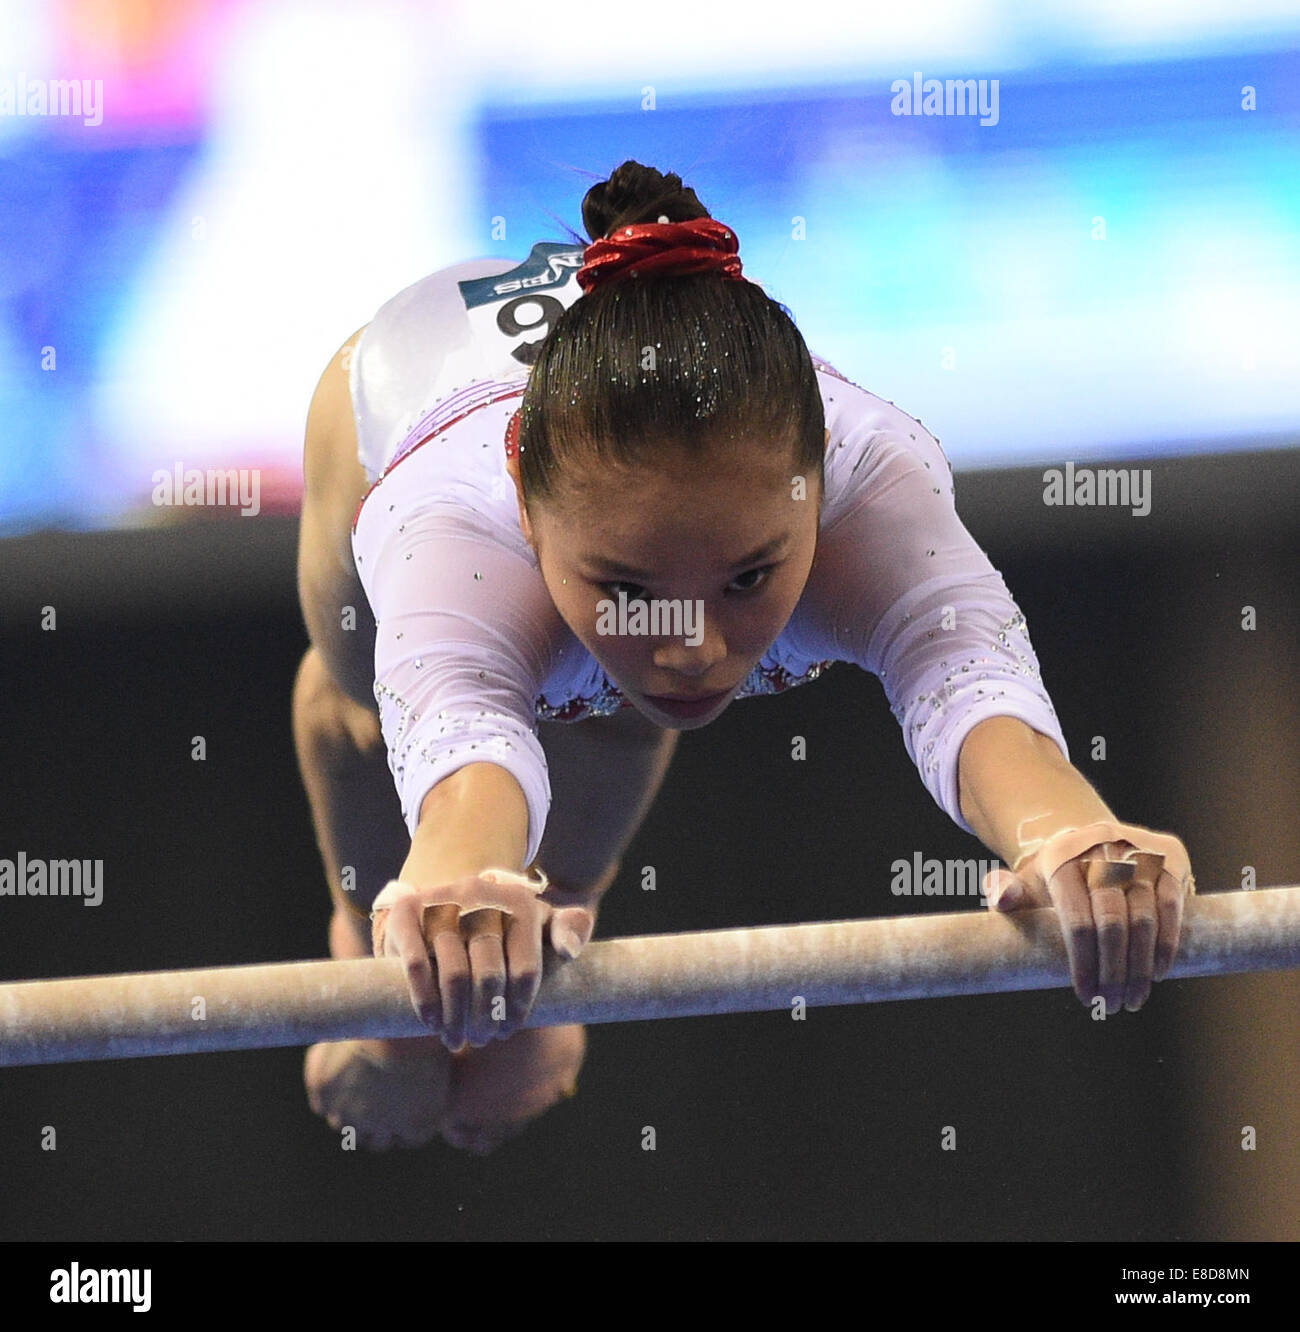 Nanning, China's Guangxi Zhuang Autonomous Region. 6th Oct, 2014. Chinese gymnast Yao Jinnan performs on the uneven bars during the women's qualifying round of the 45th Gymnastics World Championships in Nanning, capital of south China's Guangxi Zhuang Autonomous Region, Oct. 6, 2014. The 45th FIG Artistic Gymnastics World Championships lasts from Oct. 3 to 12 in Nanning. Credit:  Li Qiaoqiao/Xinhua/Alamy Live News Stock Photo